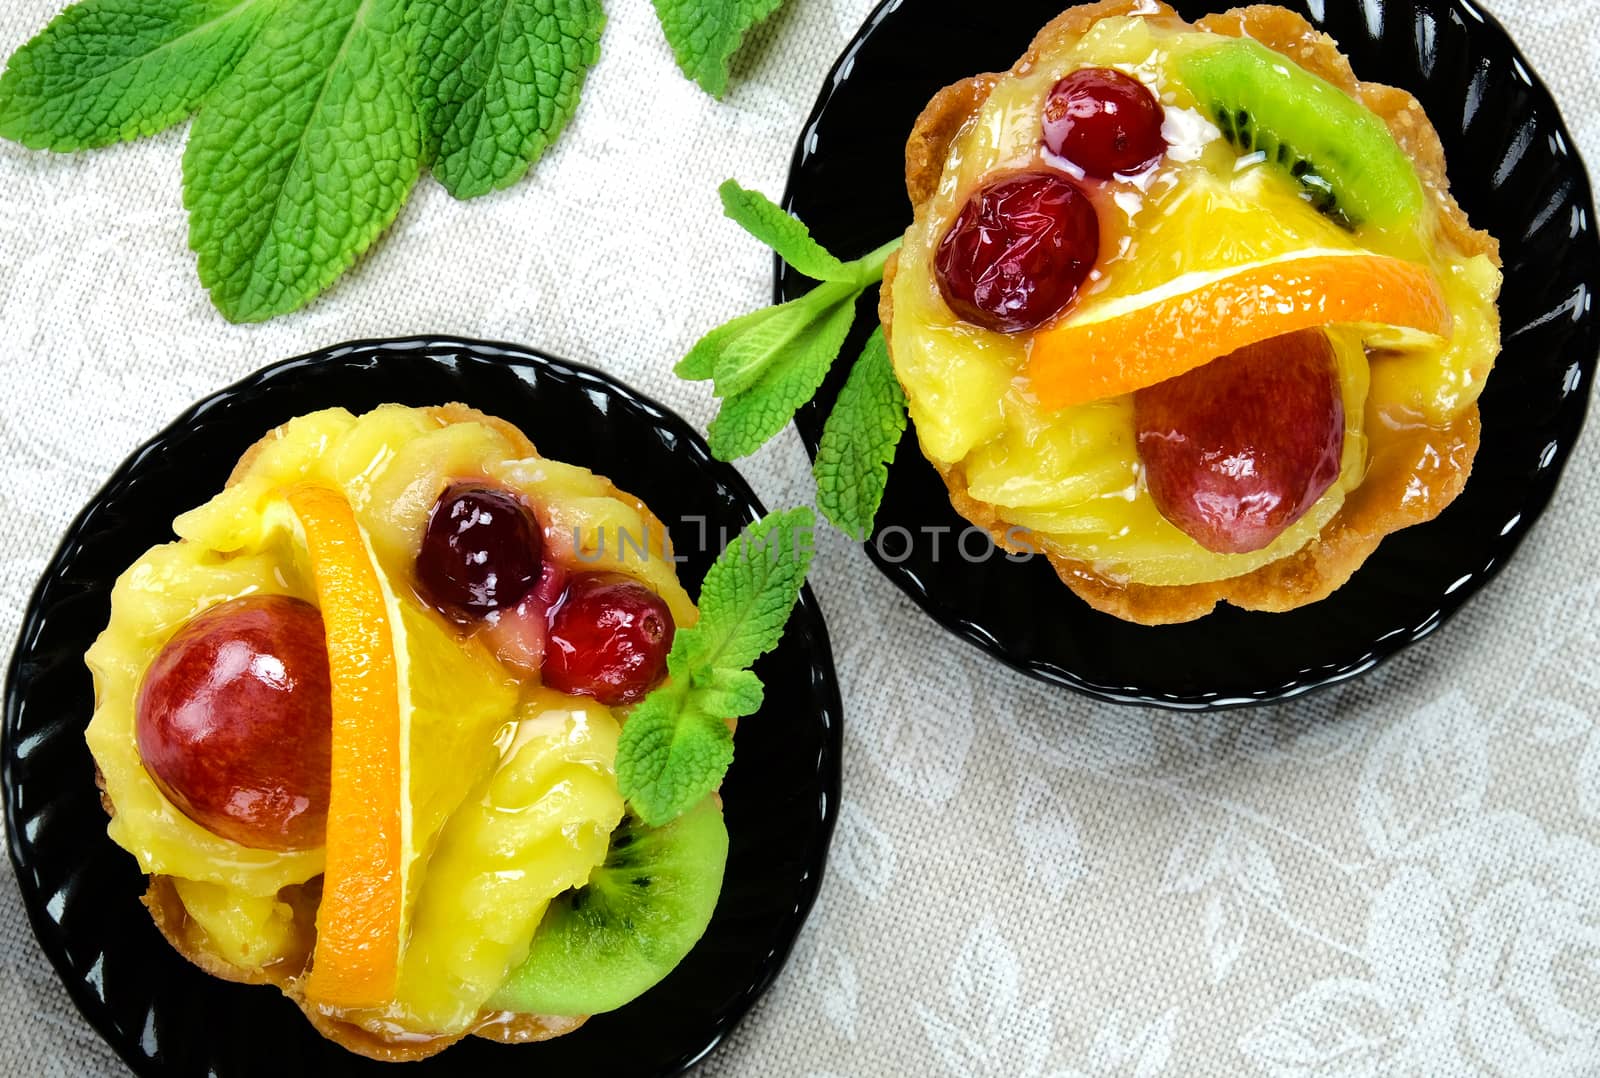 Cakes with slices of fresh fruit. by leventina